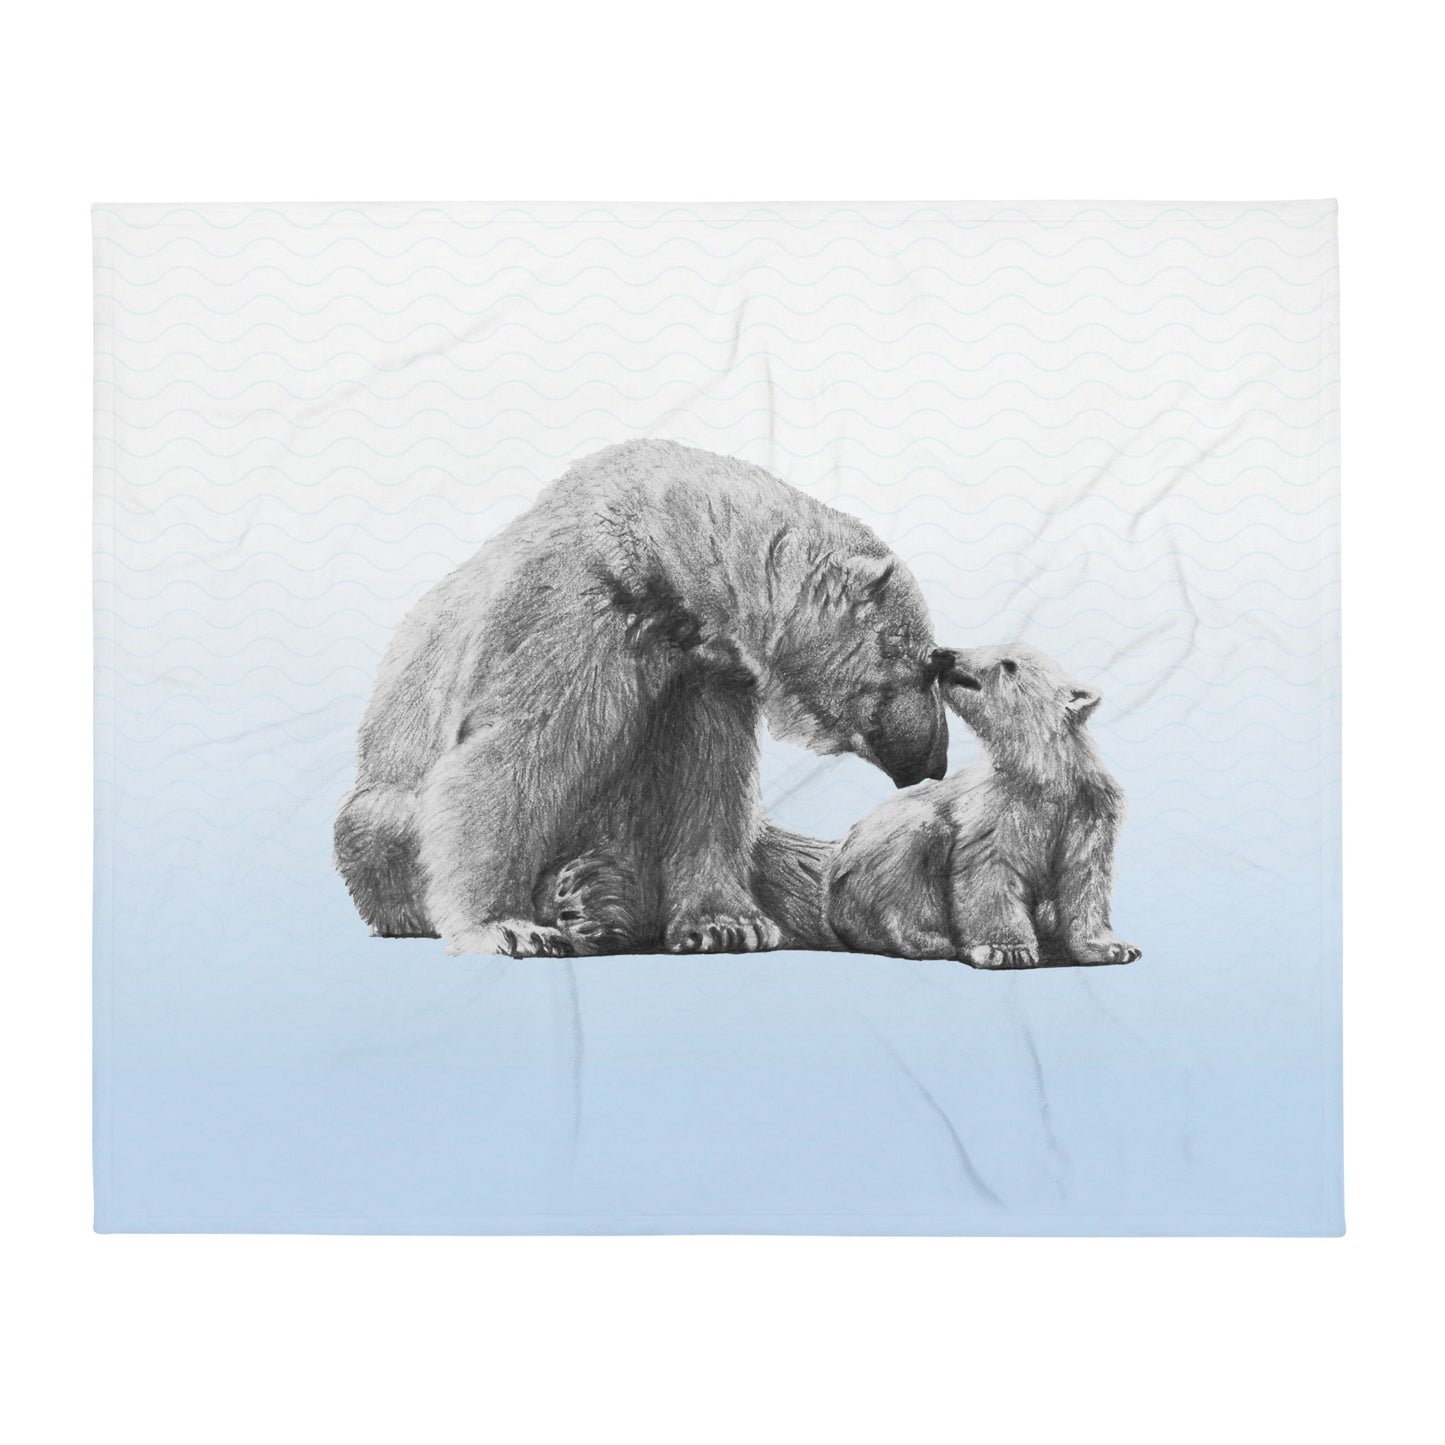 These "Polar Bear Throw Blanket" are from a drawing of mine created with a graphite pencil. It has been digitally optimized and transferred to a 100% Polyester throw blanket.